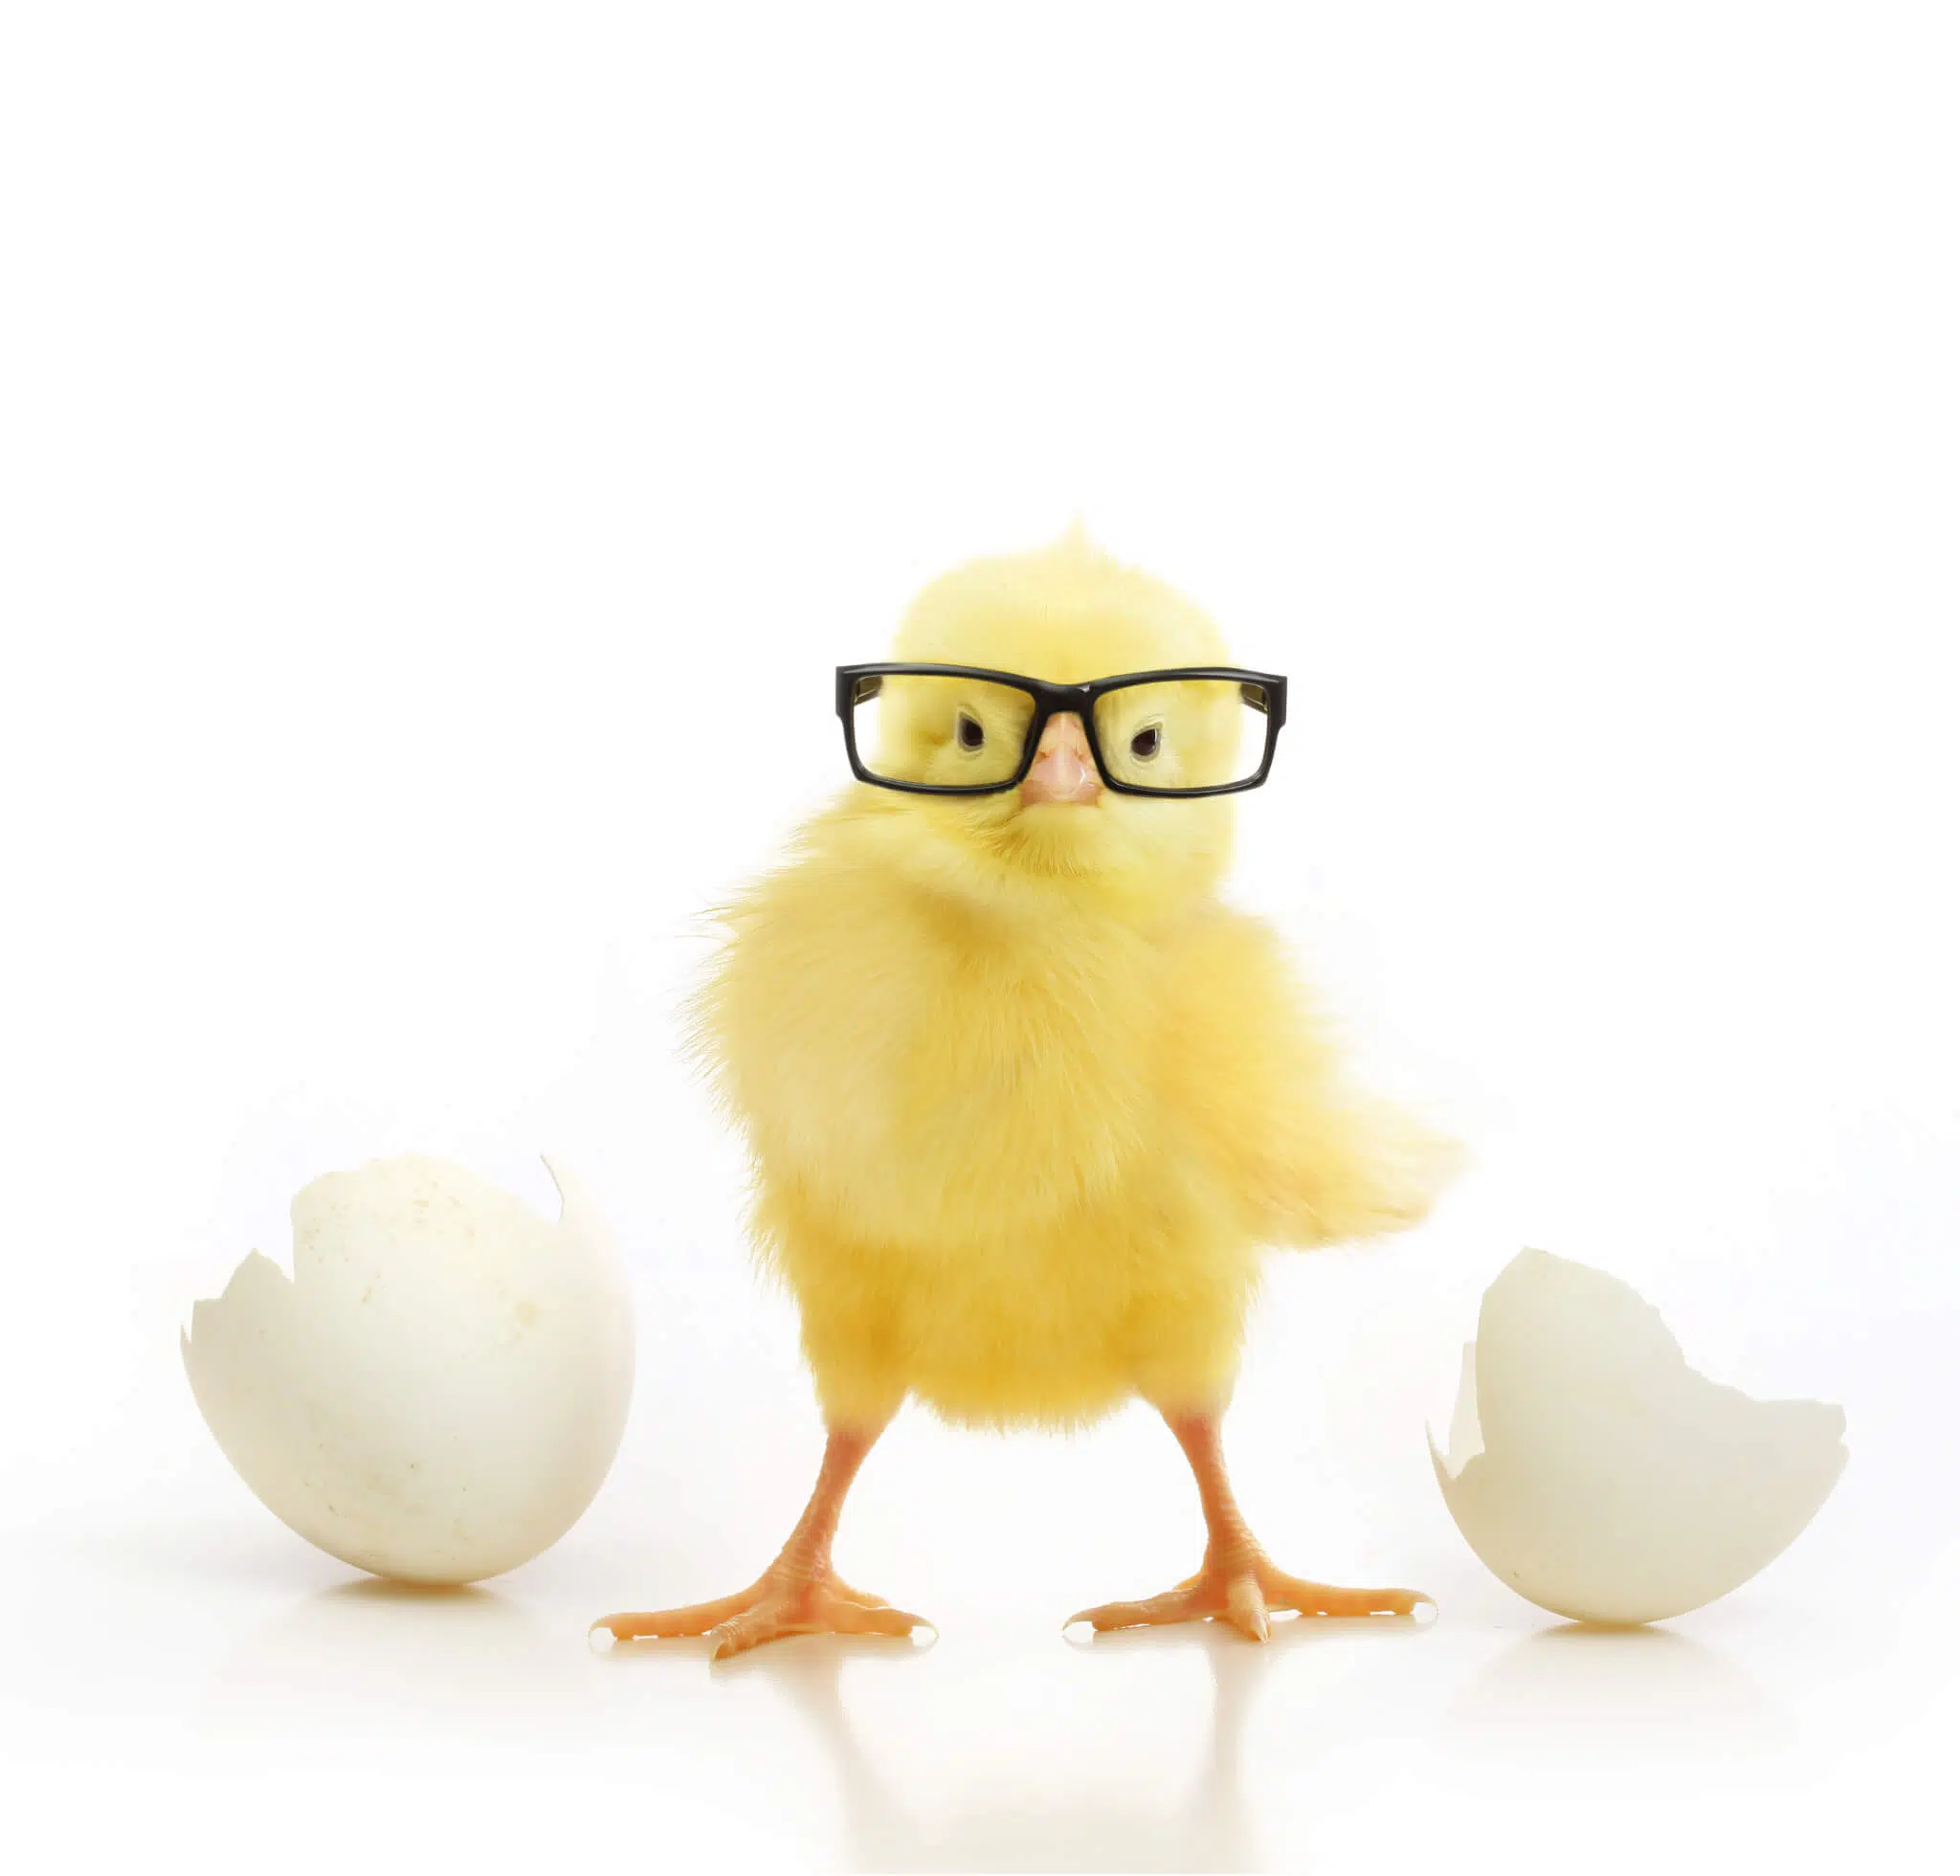 Cute little chicken in black eye glasses coming out of a white egg isolated on white background